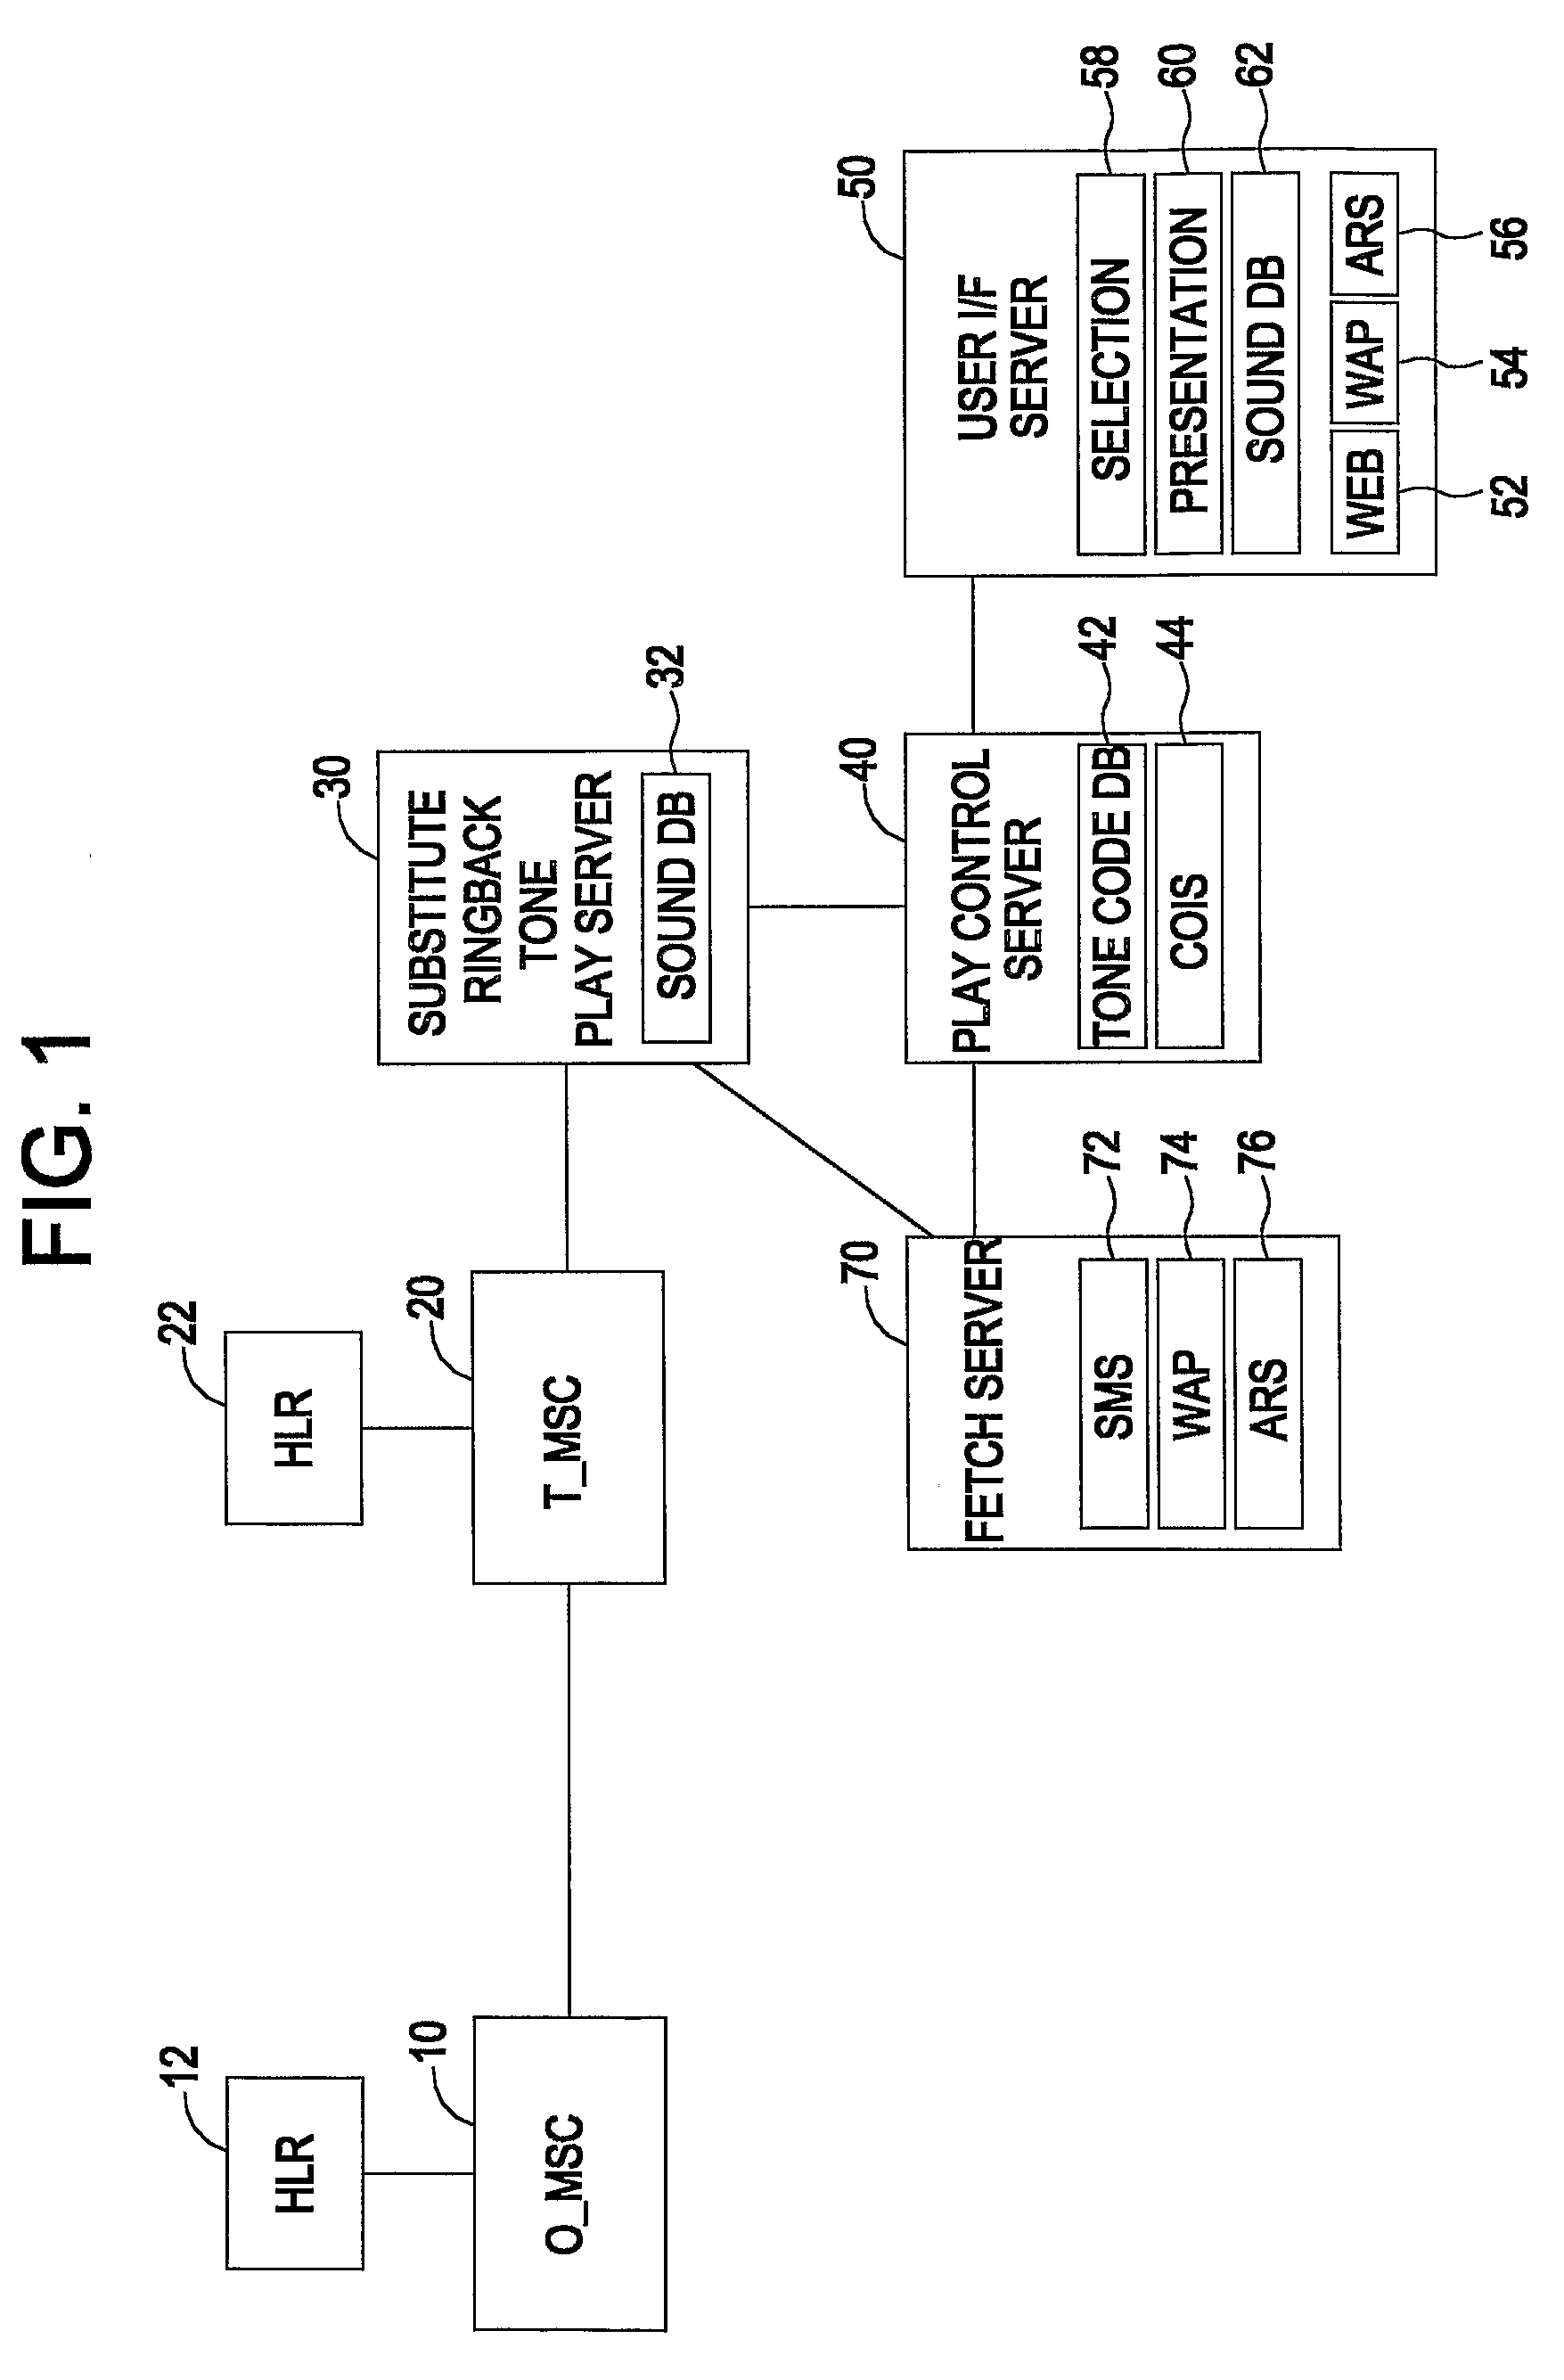 Method for setting substitute ringback tone of calling party in mobile communications system